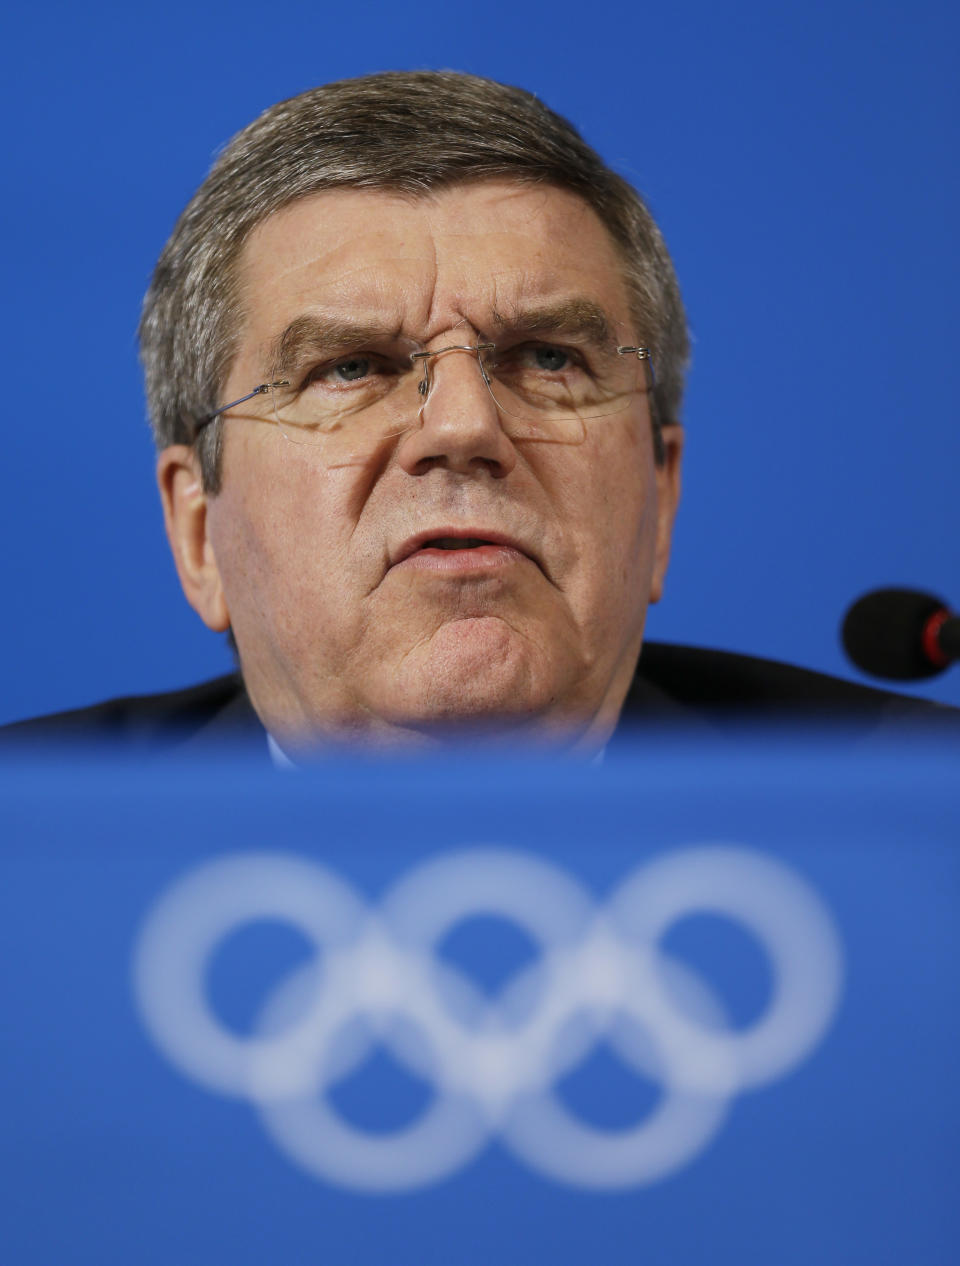 International Olympic Committee President Thomas Bach answers a question during a news conference at the 2014 Winter Olympics, Sunday, Feb. 23, 2014, in Sochi, Russia. (AP Photo/Morry Gash)